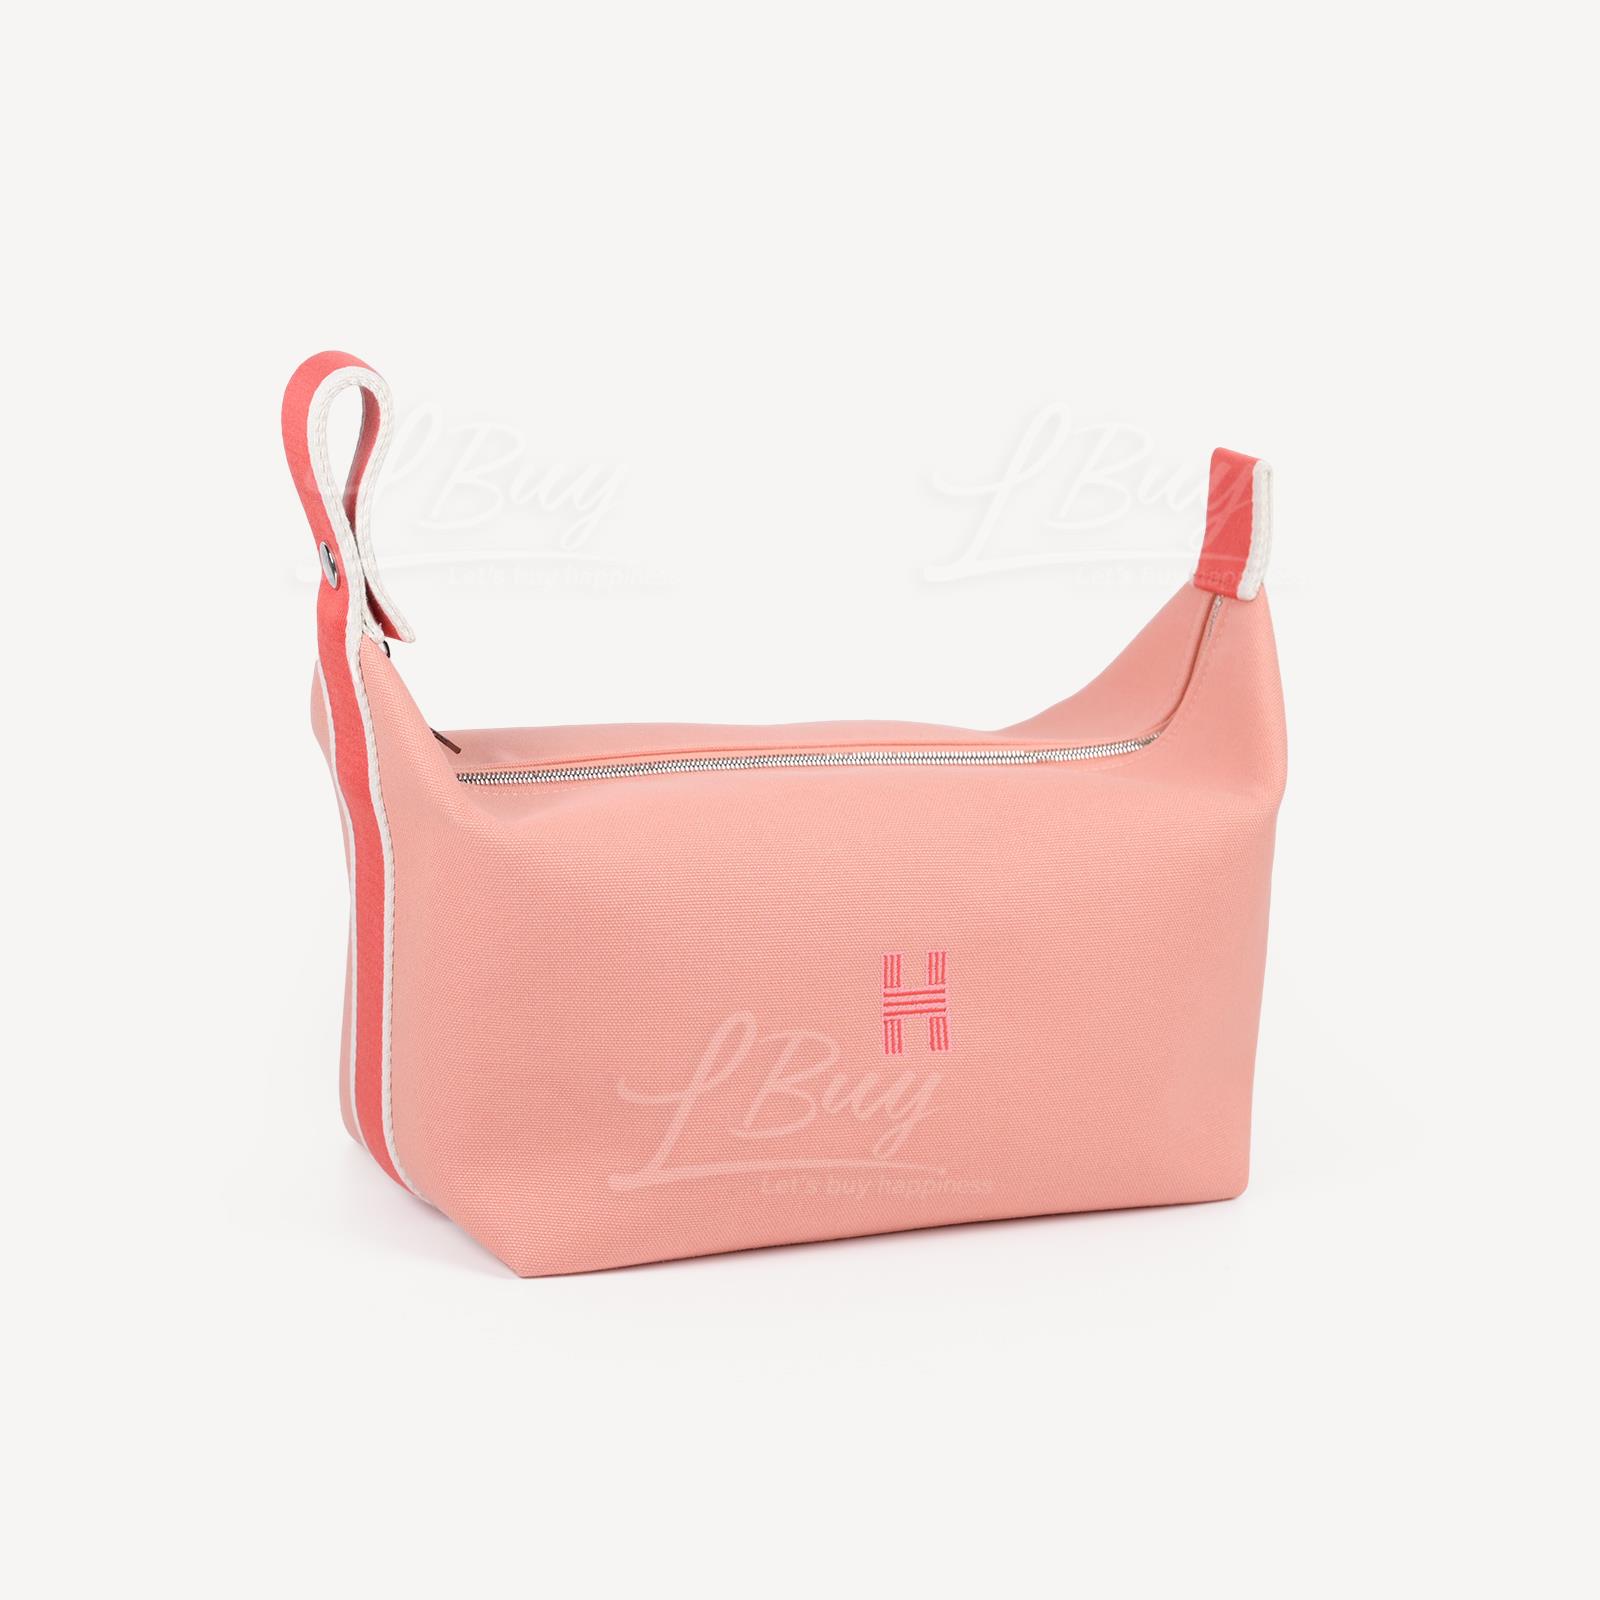 Hermes Small Bride-a-brac Vanity Pouch In Goyave Pink | ModeSens